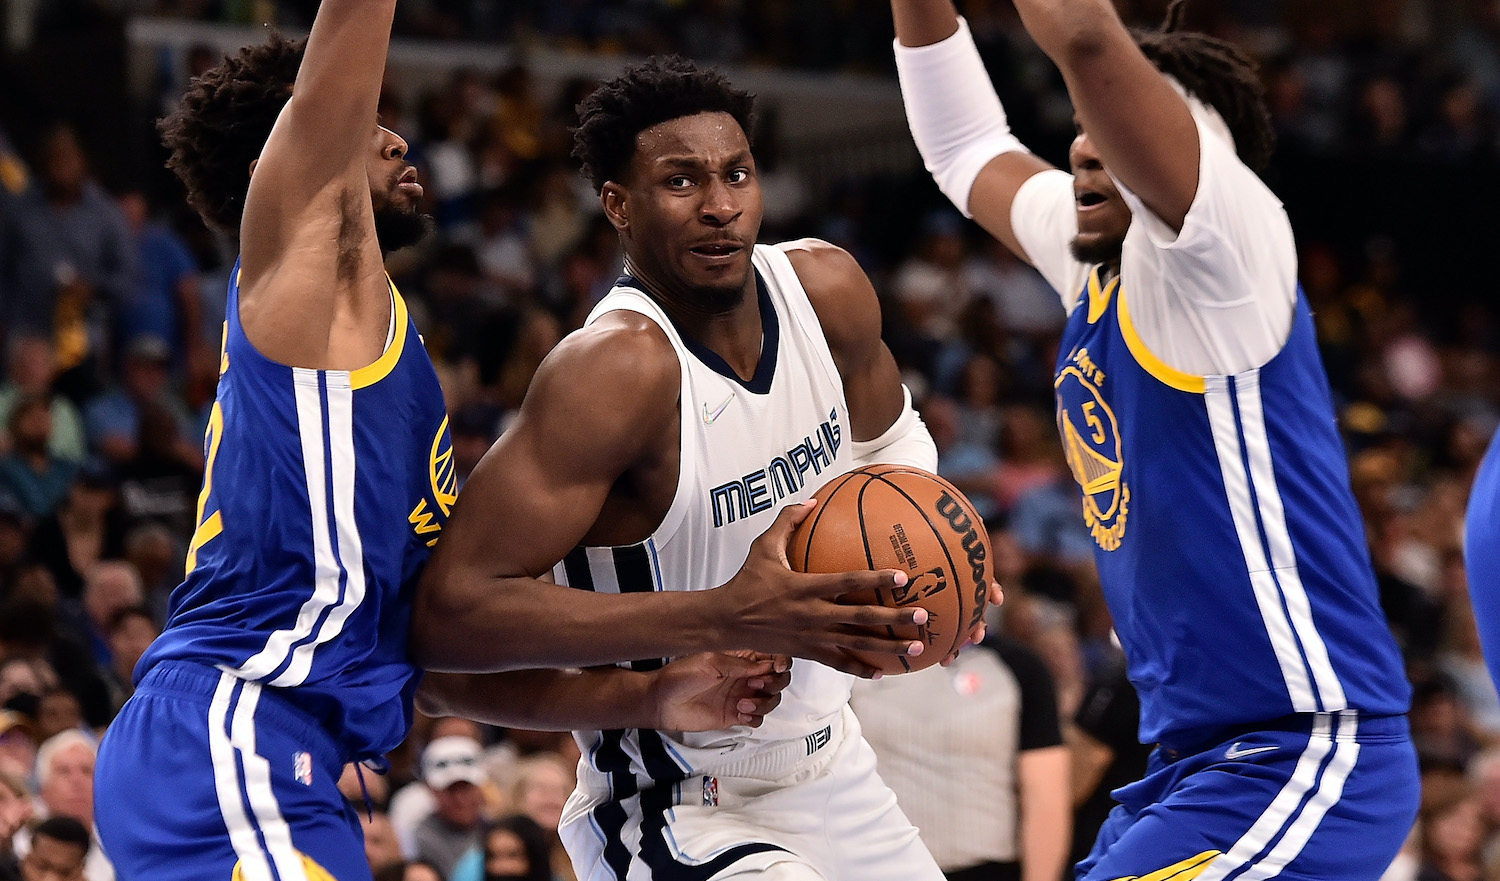 MEMPHIS, TENNESSEE - MAY 01: Jaren Jackson Jr. #13 of the Memphis Grizzlies goes to the basket against Andrew Wiggins #22 of the Golden State Warriors during Game One of the Western Conference Semifinals of the NBA Playoffs at FedExForum on May 01, 2022 in Memphis, Tennessee. NOTE TO USER: User expressly acknowledges and agrees that, by downloading and or using this photograph, User is consenting to the terms and conditions of the Getty Images License Agreement. (Photo by Justin Ford/Getty Images)